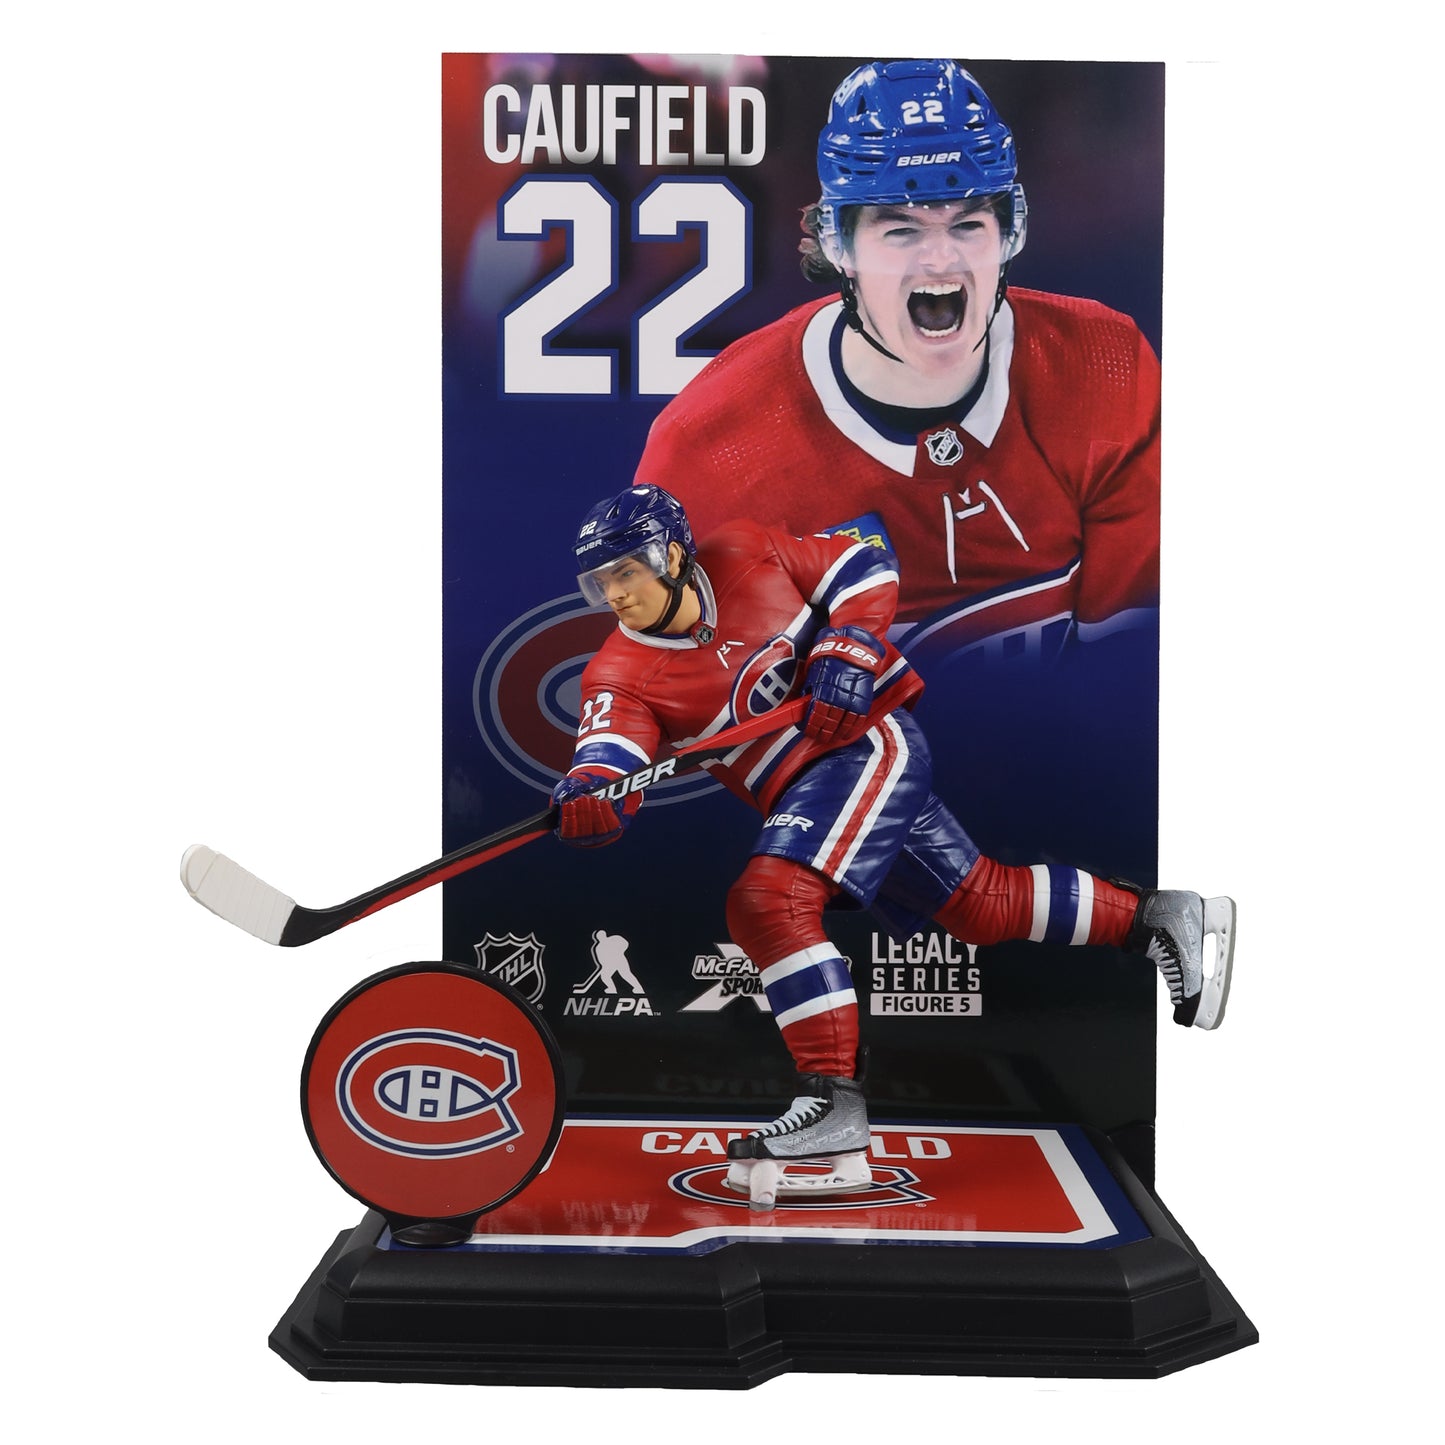 McFarlane Toys: NHL: Cole Caufield (Montreal Canadiens)